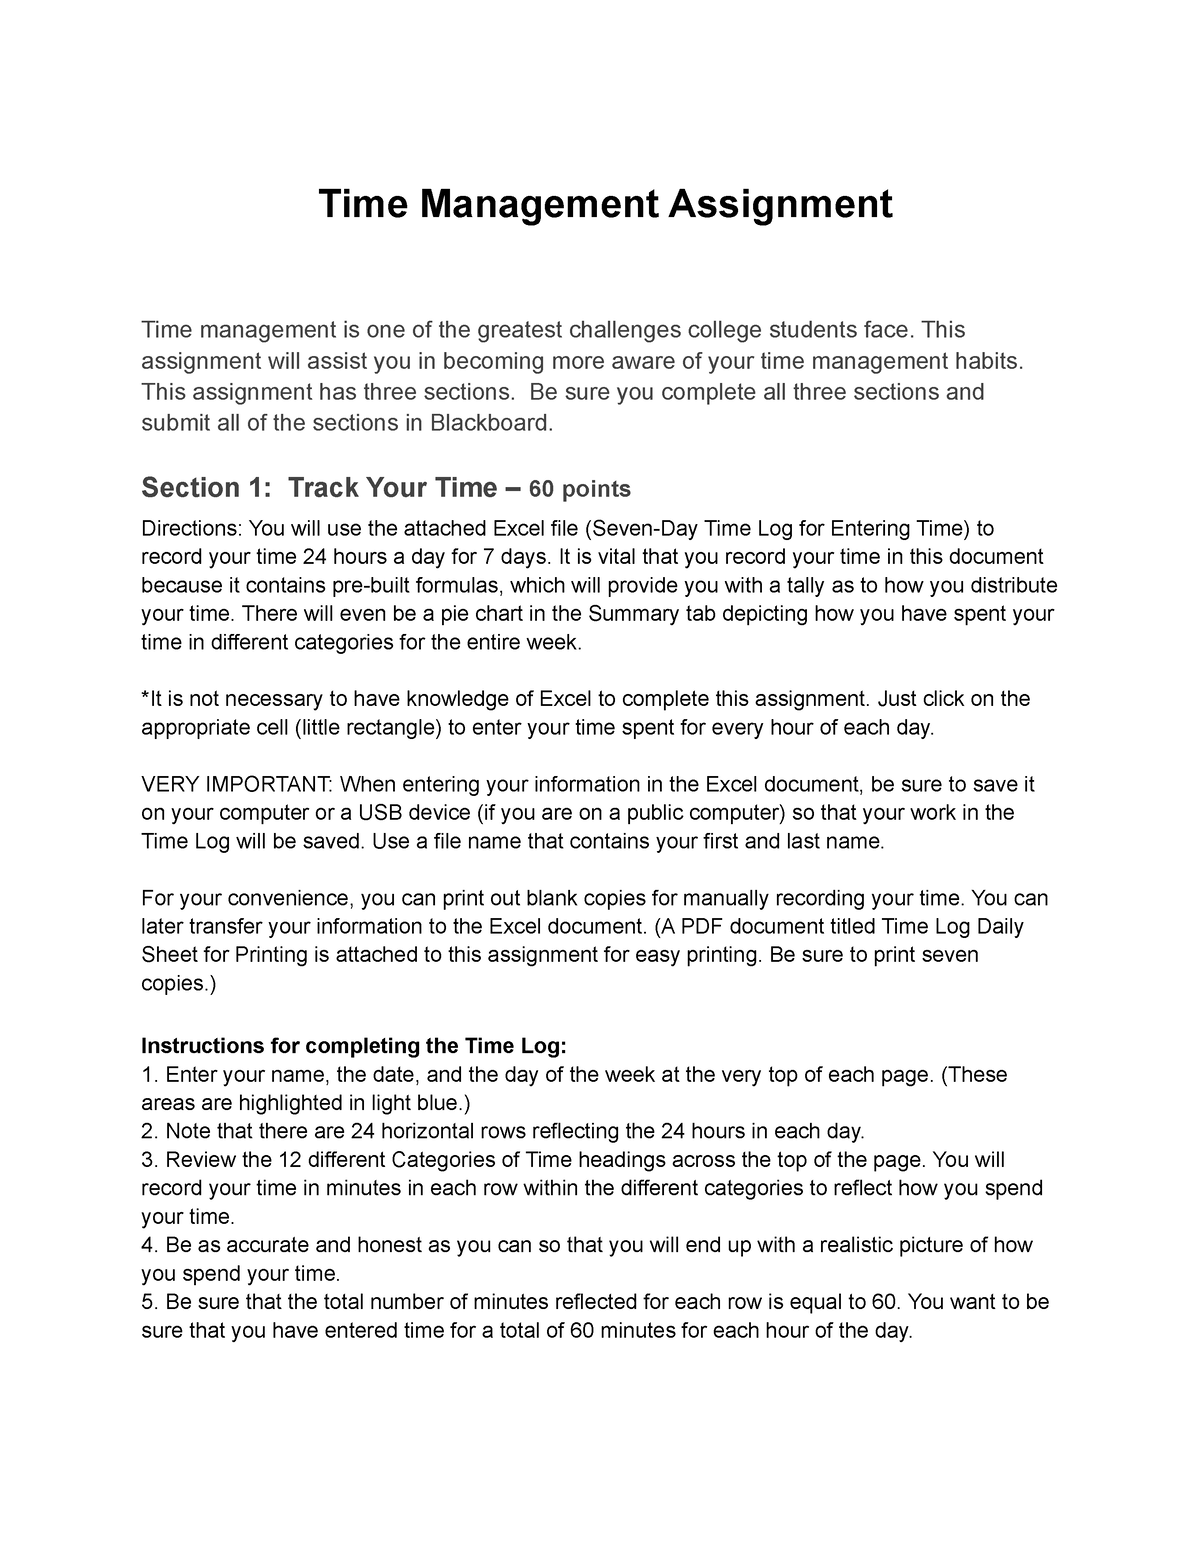 time management assignment for students